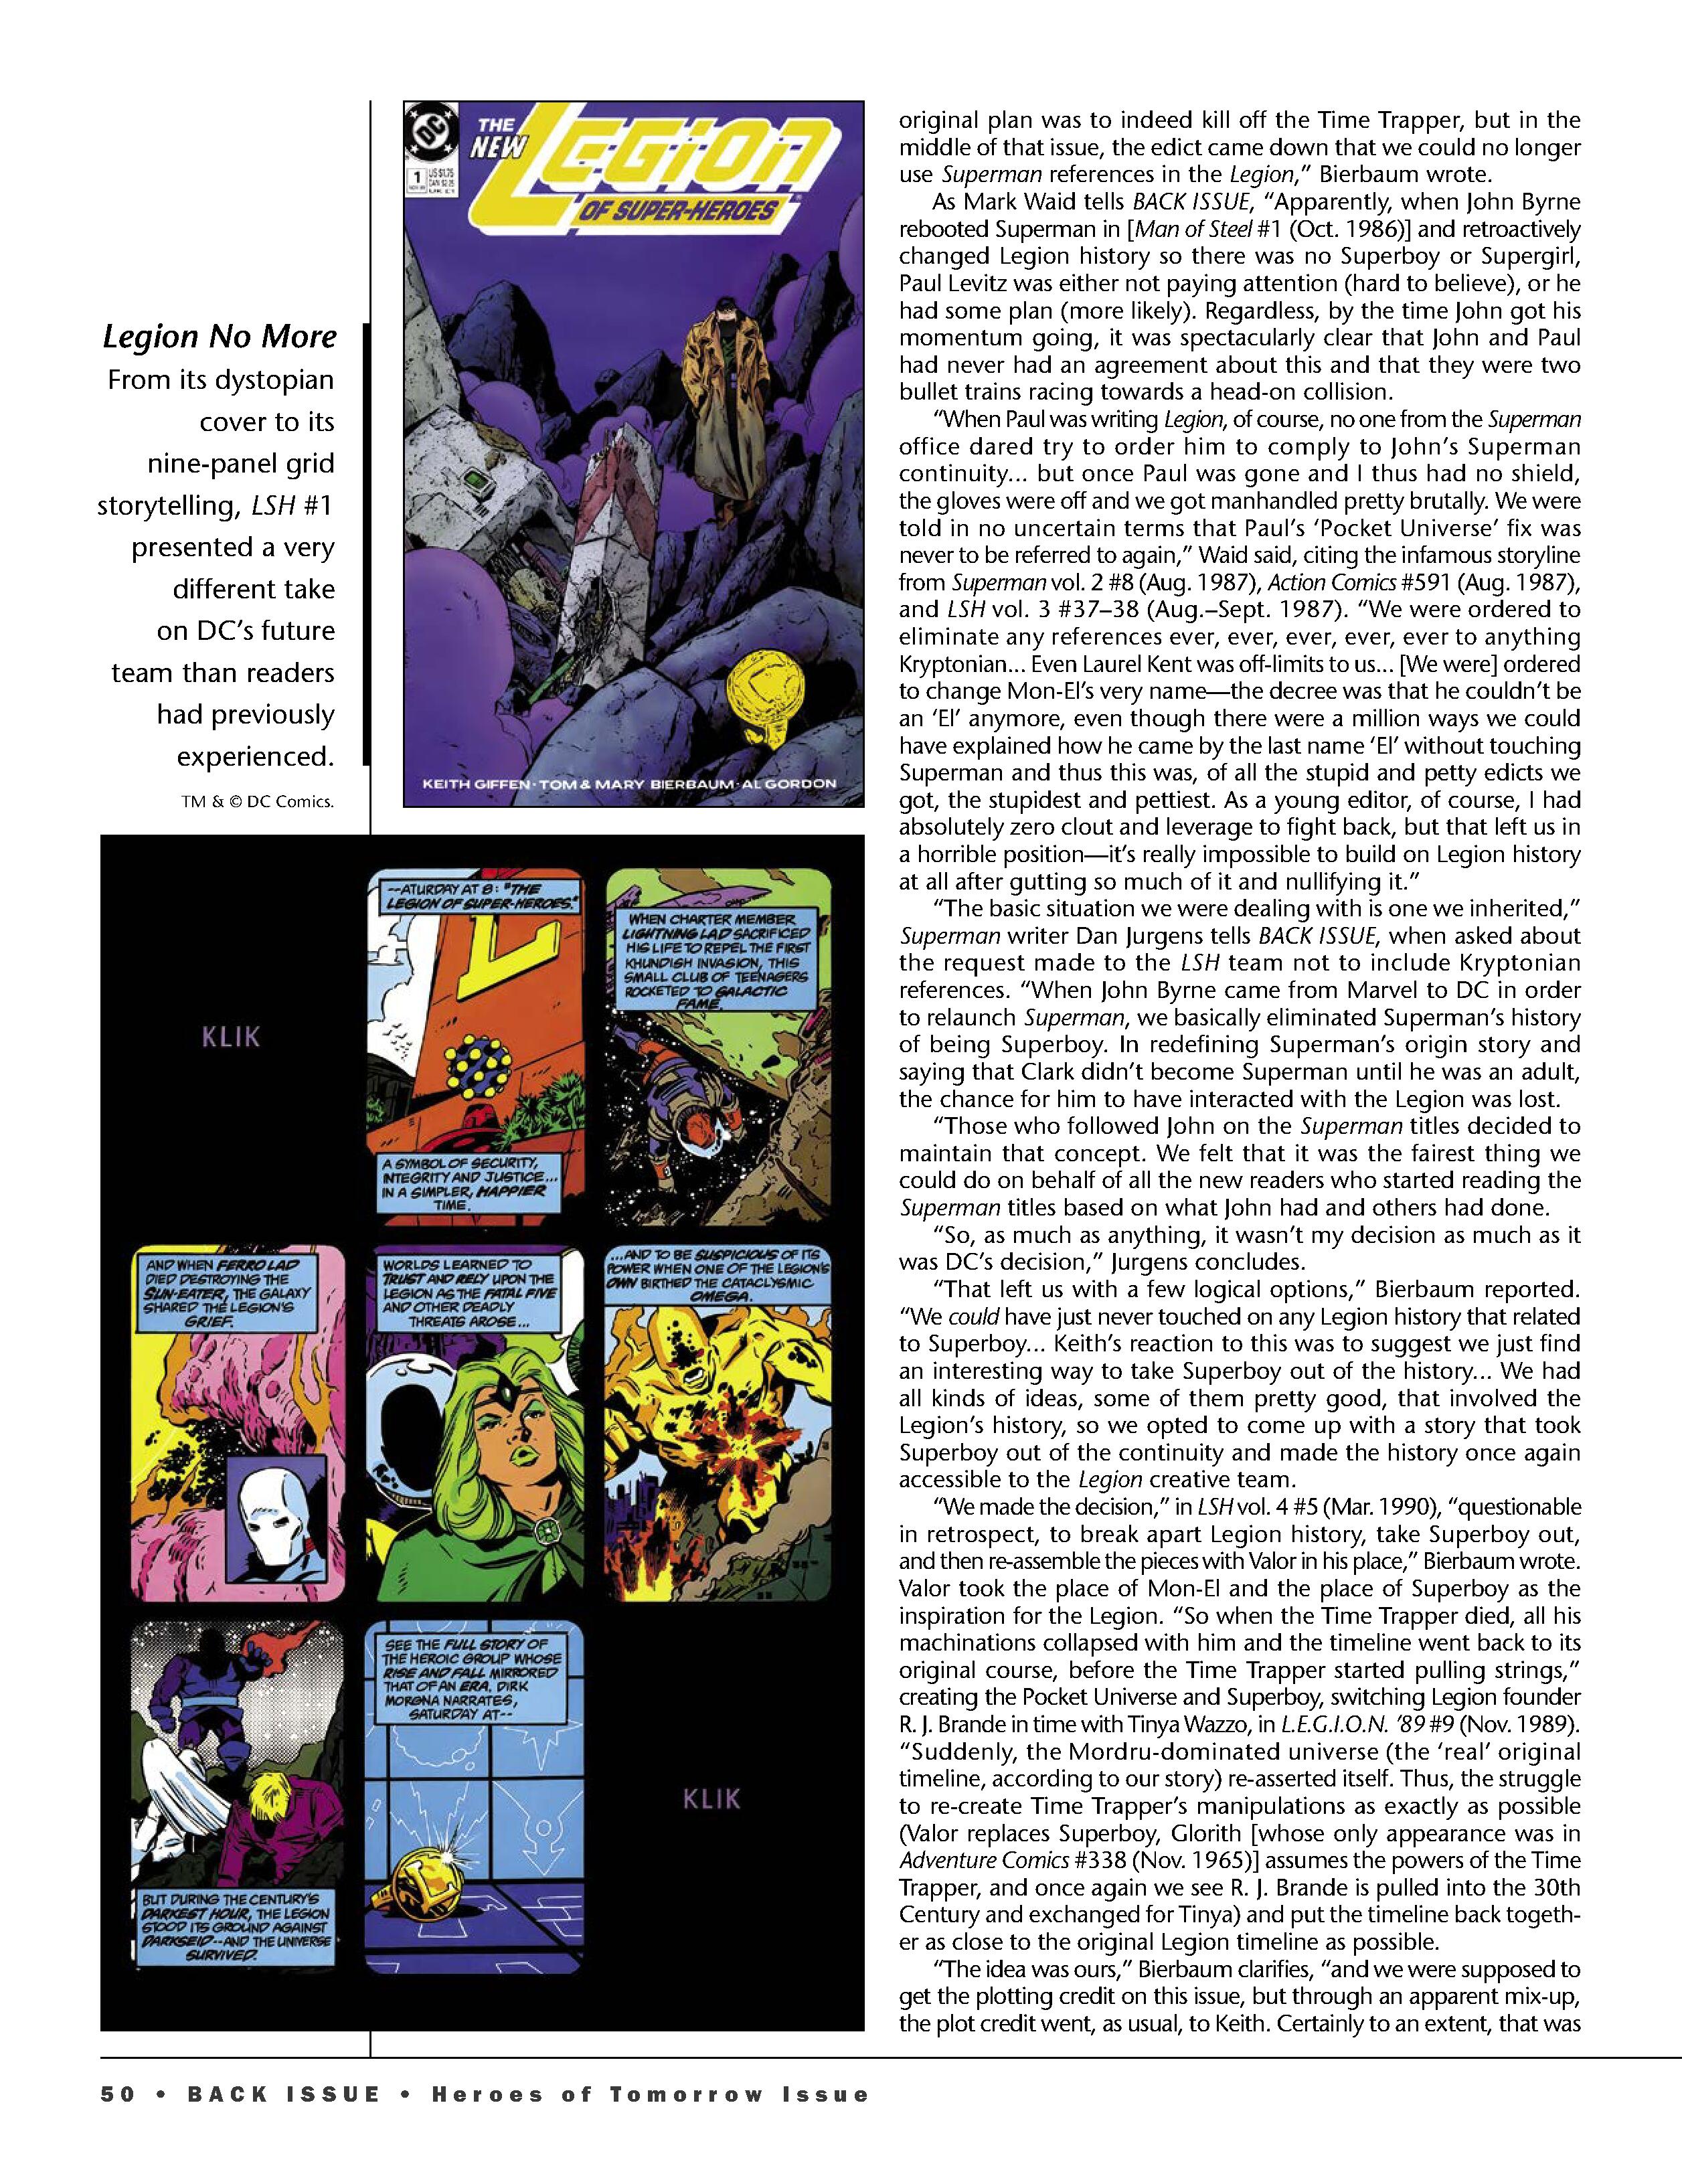 Read online Back Issue comic -  Issue #120 - 52